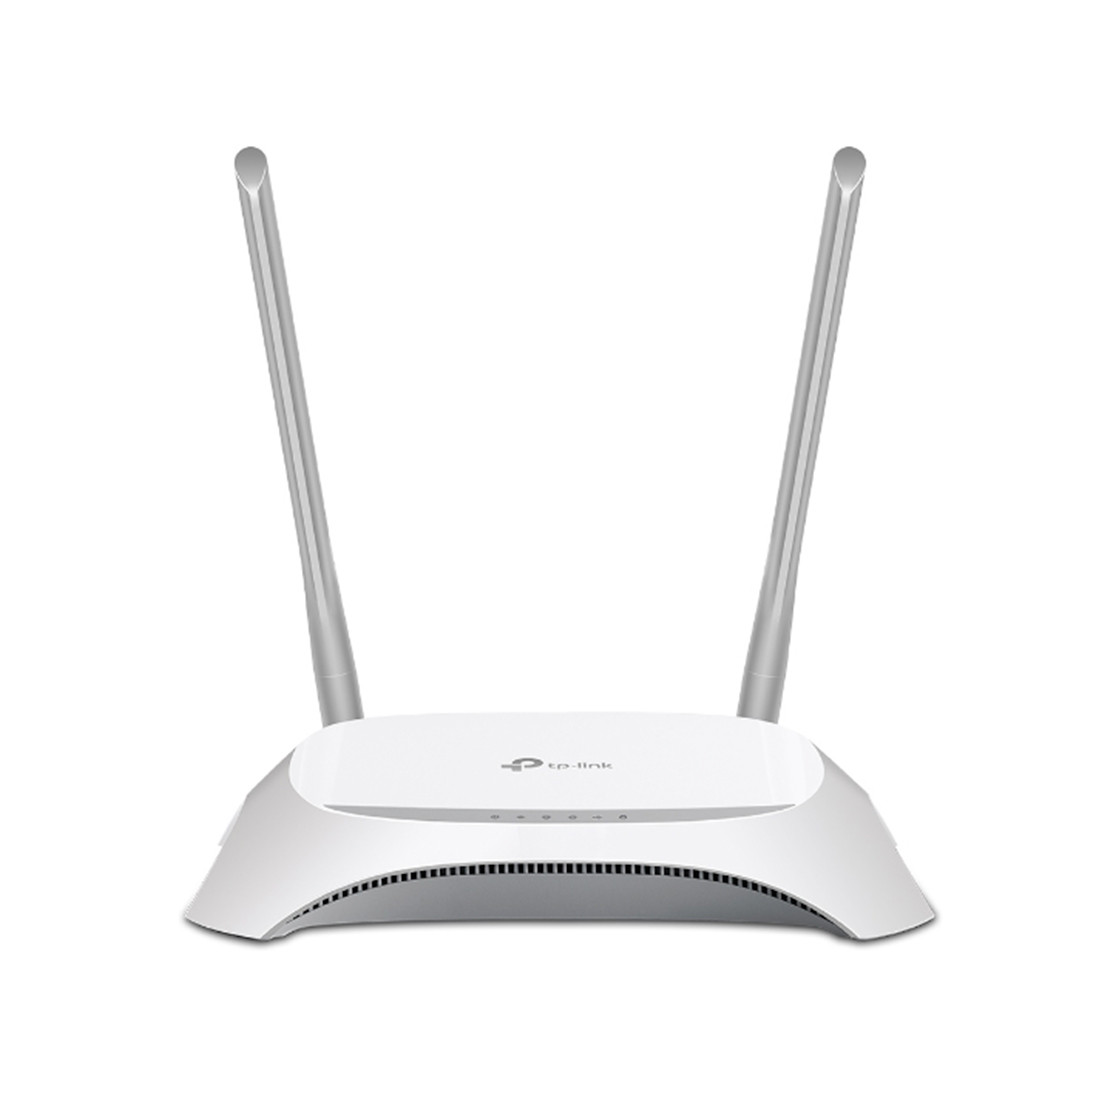 Маршрутизатор, TP-Link, TL-WR842N, 300 Мбит/с, 4 порта LAN 10/100 Мбит/с, 1 порт WAN 10/100 Мбит/с, 1 порт USB - фото 3 - id-p113449761